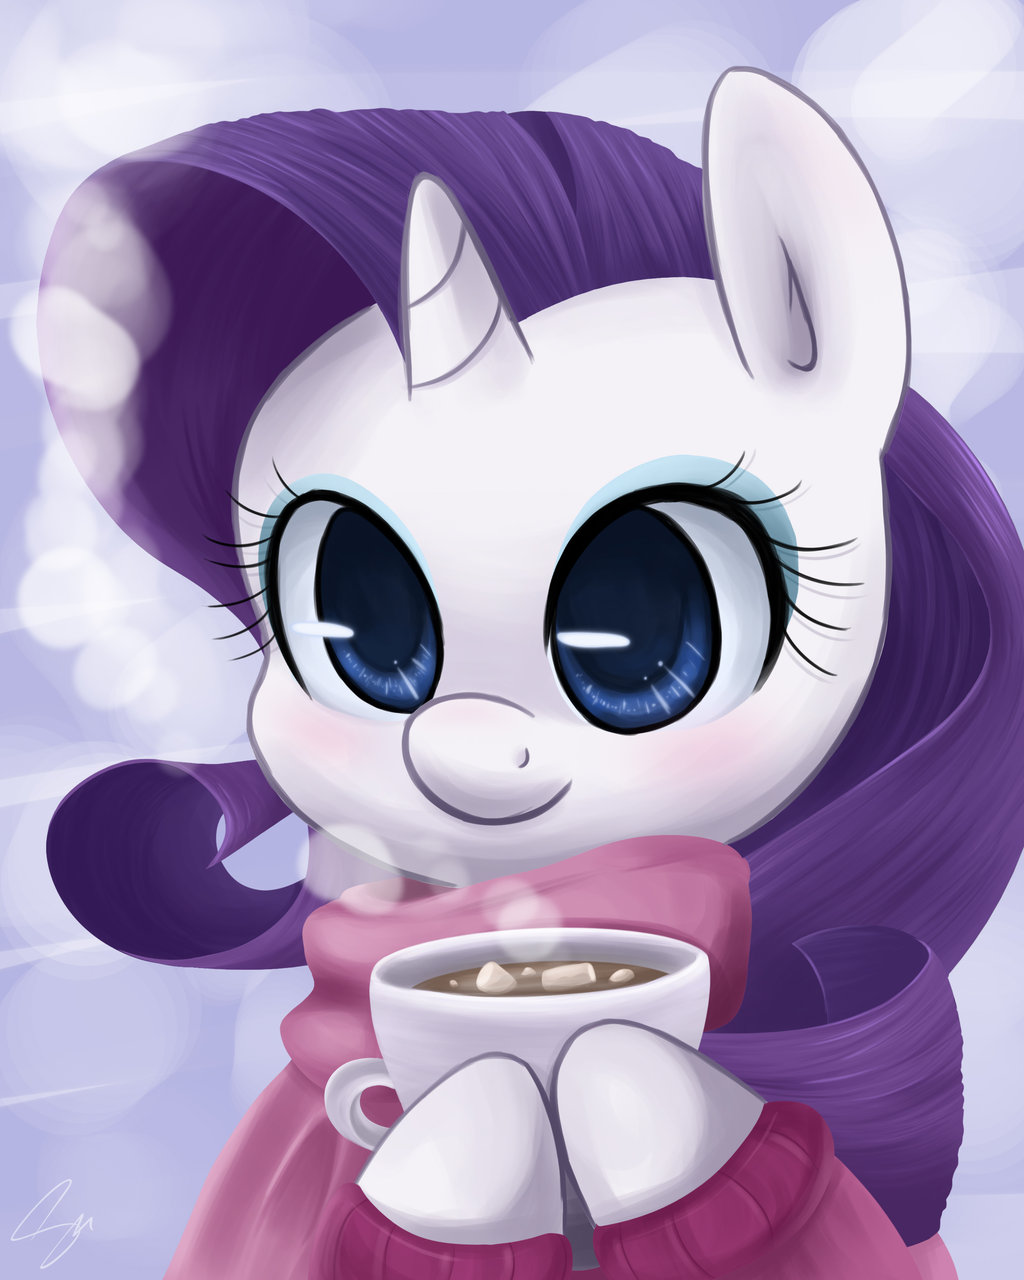 marshmallow_pone_by_steffy_beff-d5q92yl.